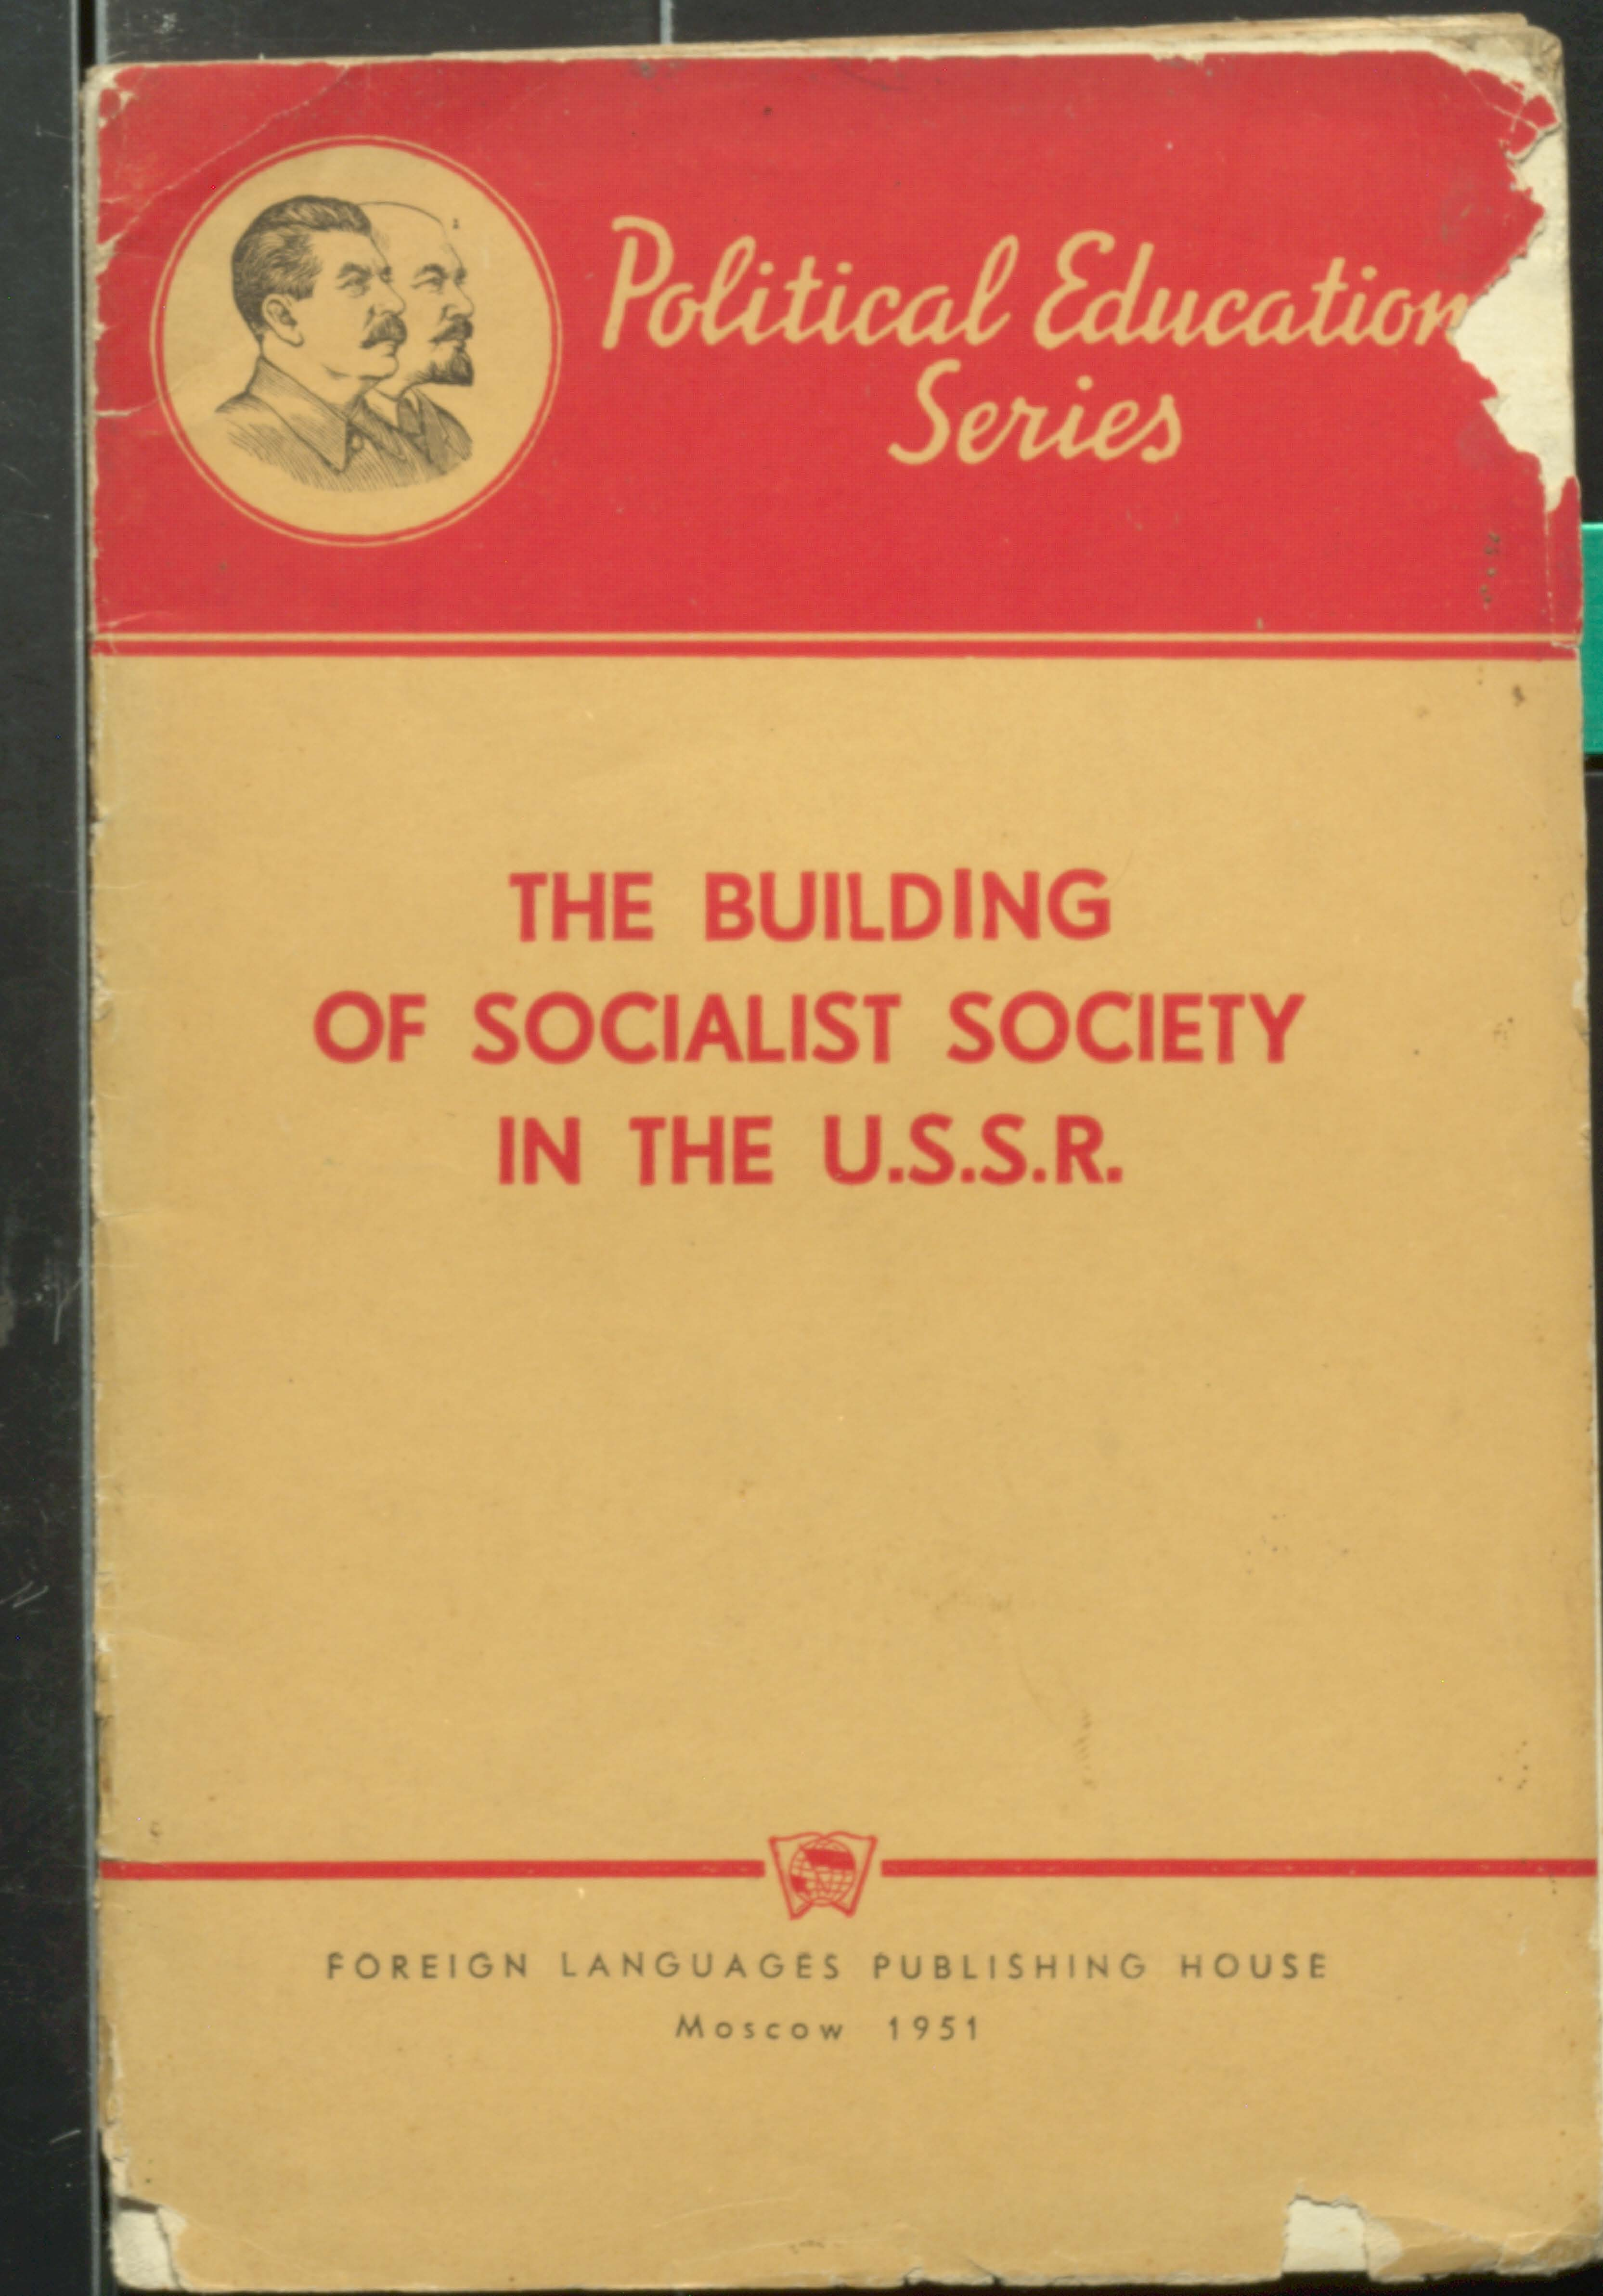 The Builiding Of Socialist Society In The U.S.S.R